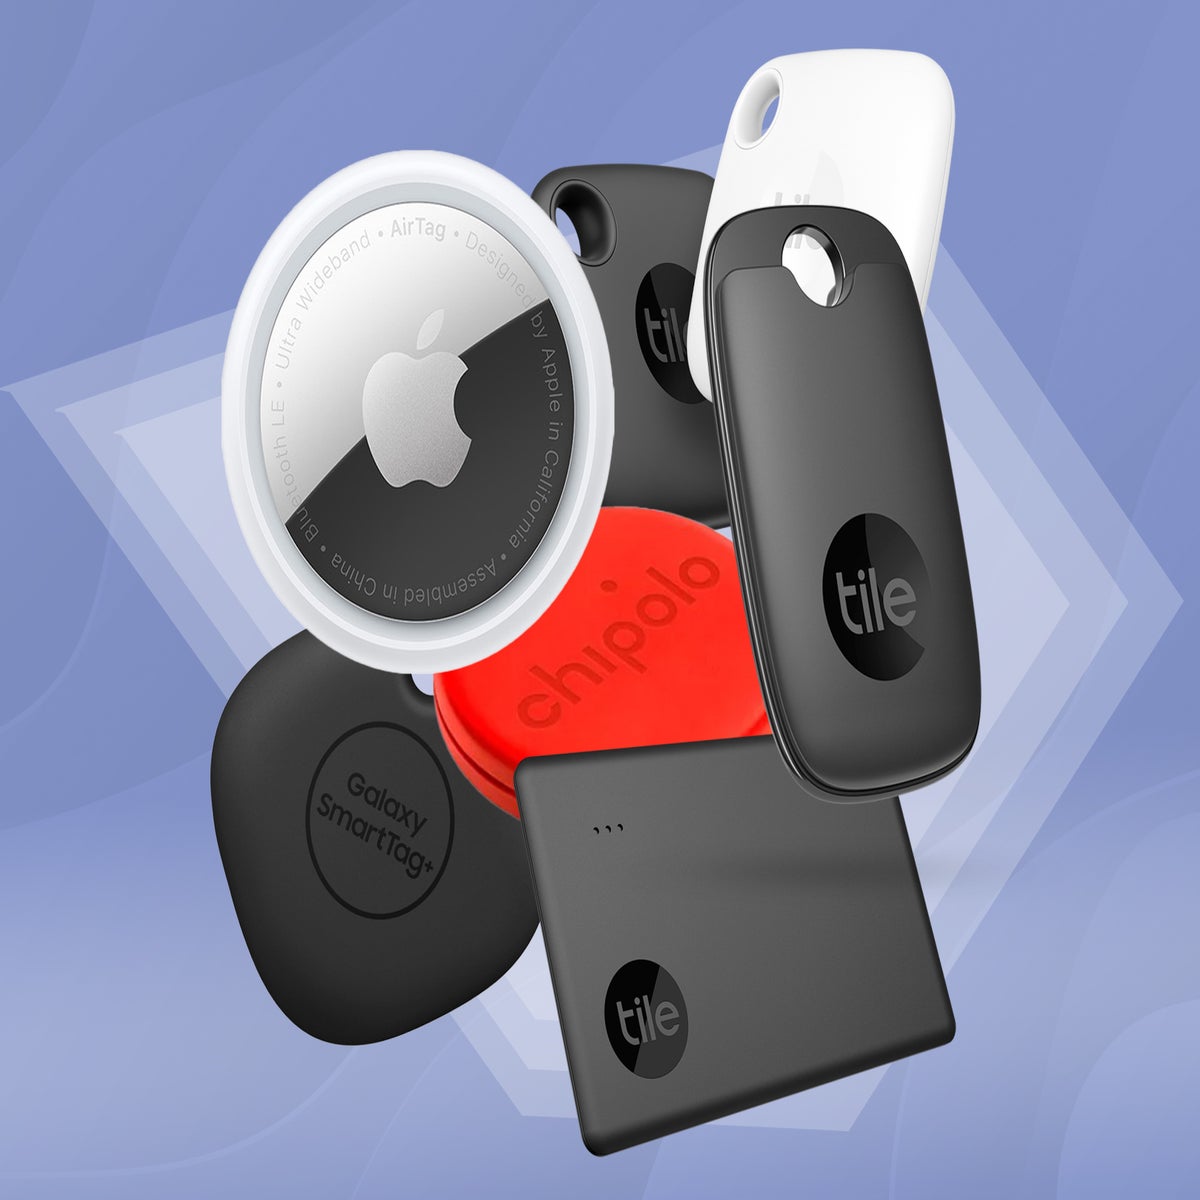 Apple AirTag: do you really need them? The cute wireless tracker gadget  will help find valuables and lost keys with the Find My app